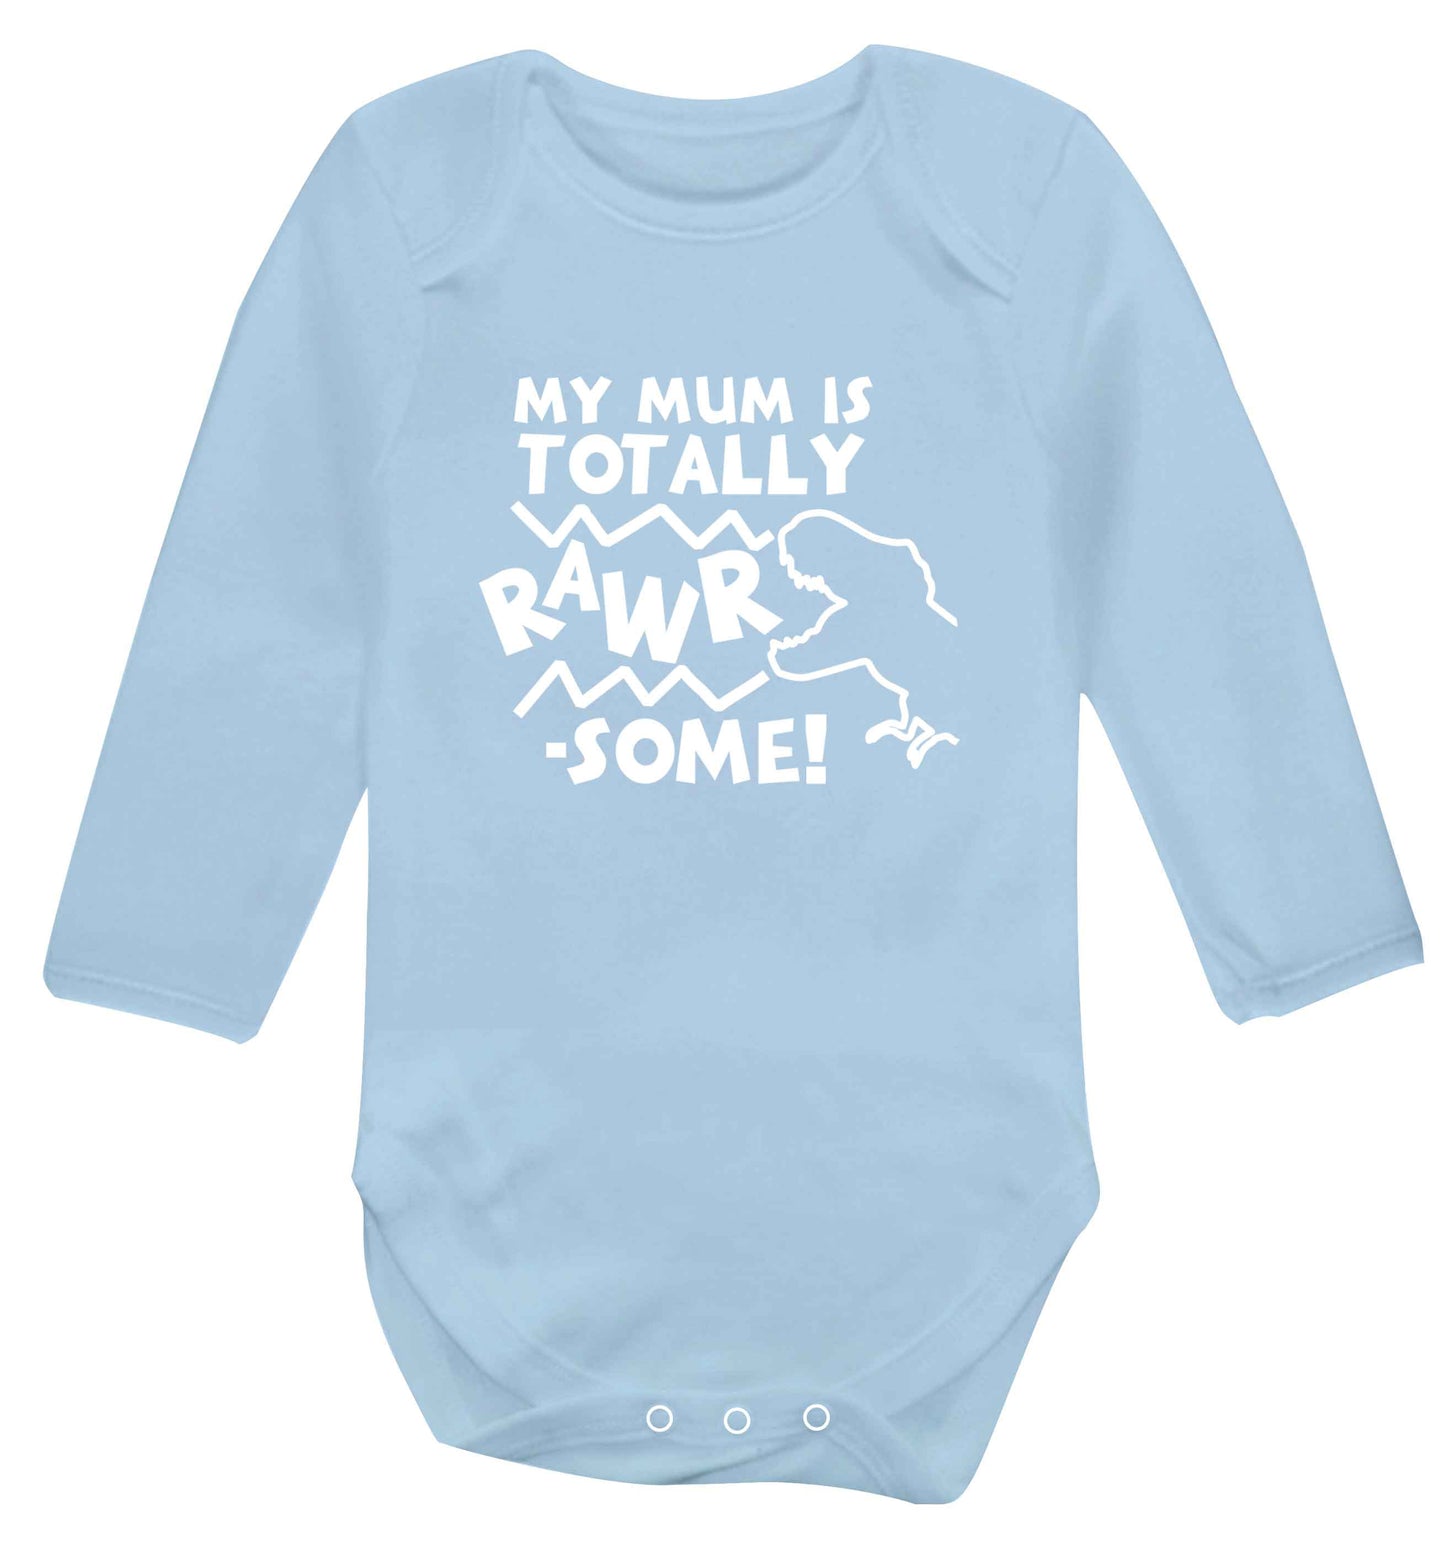 My mum is totally rawrsome baby vest long sleeved pale blue 6-12 months